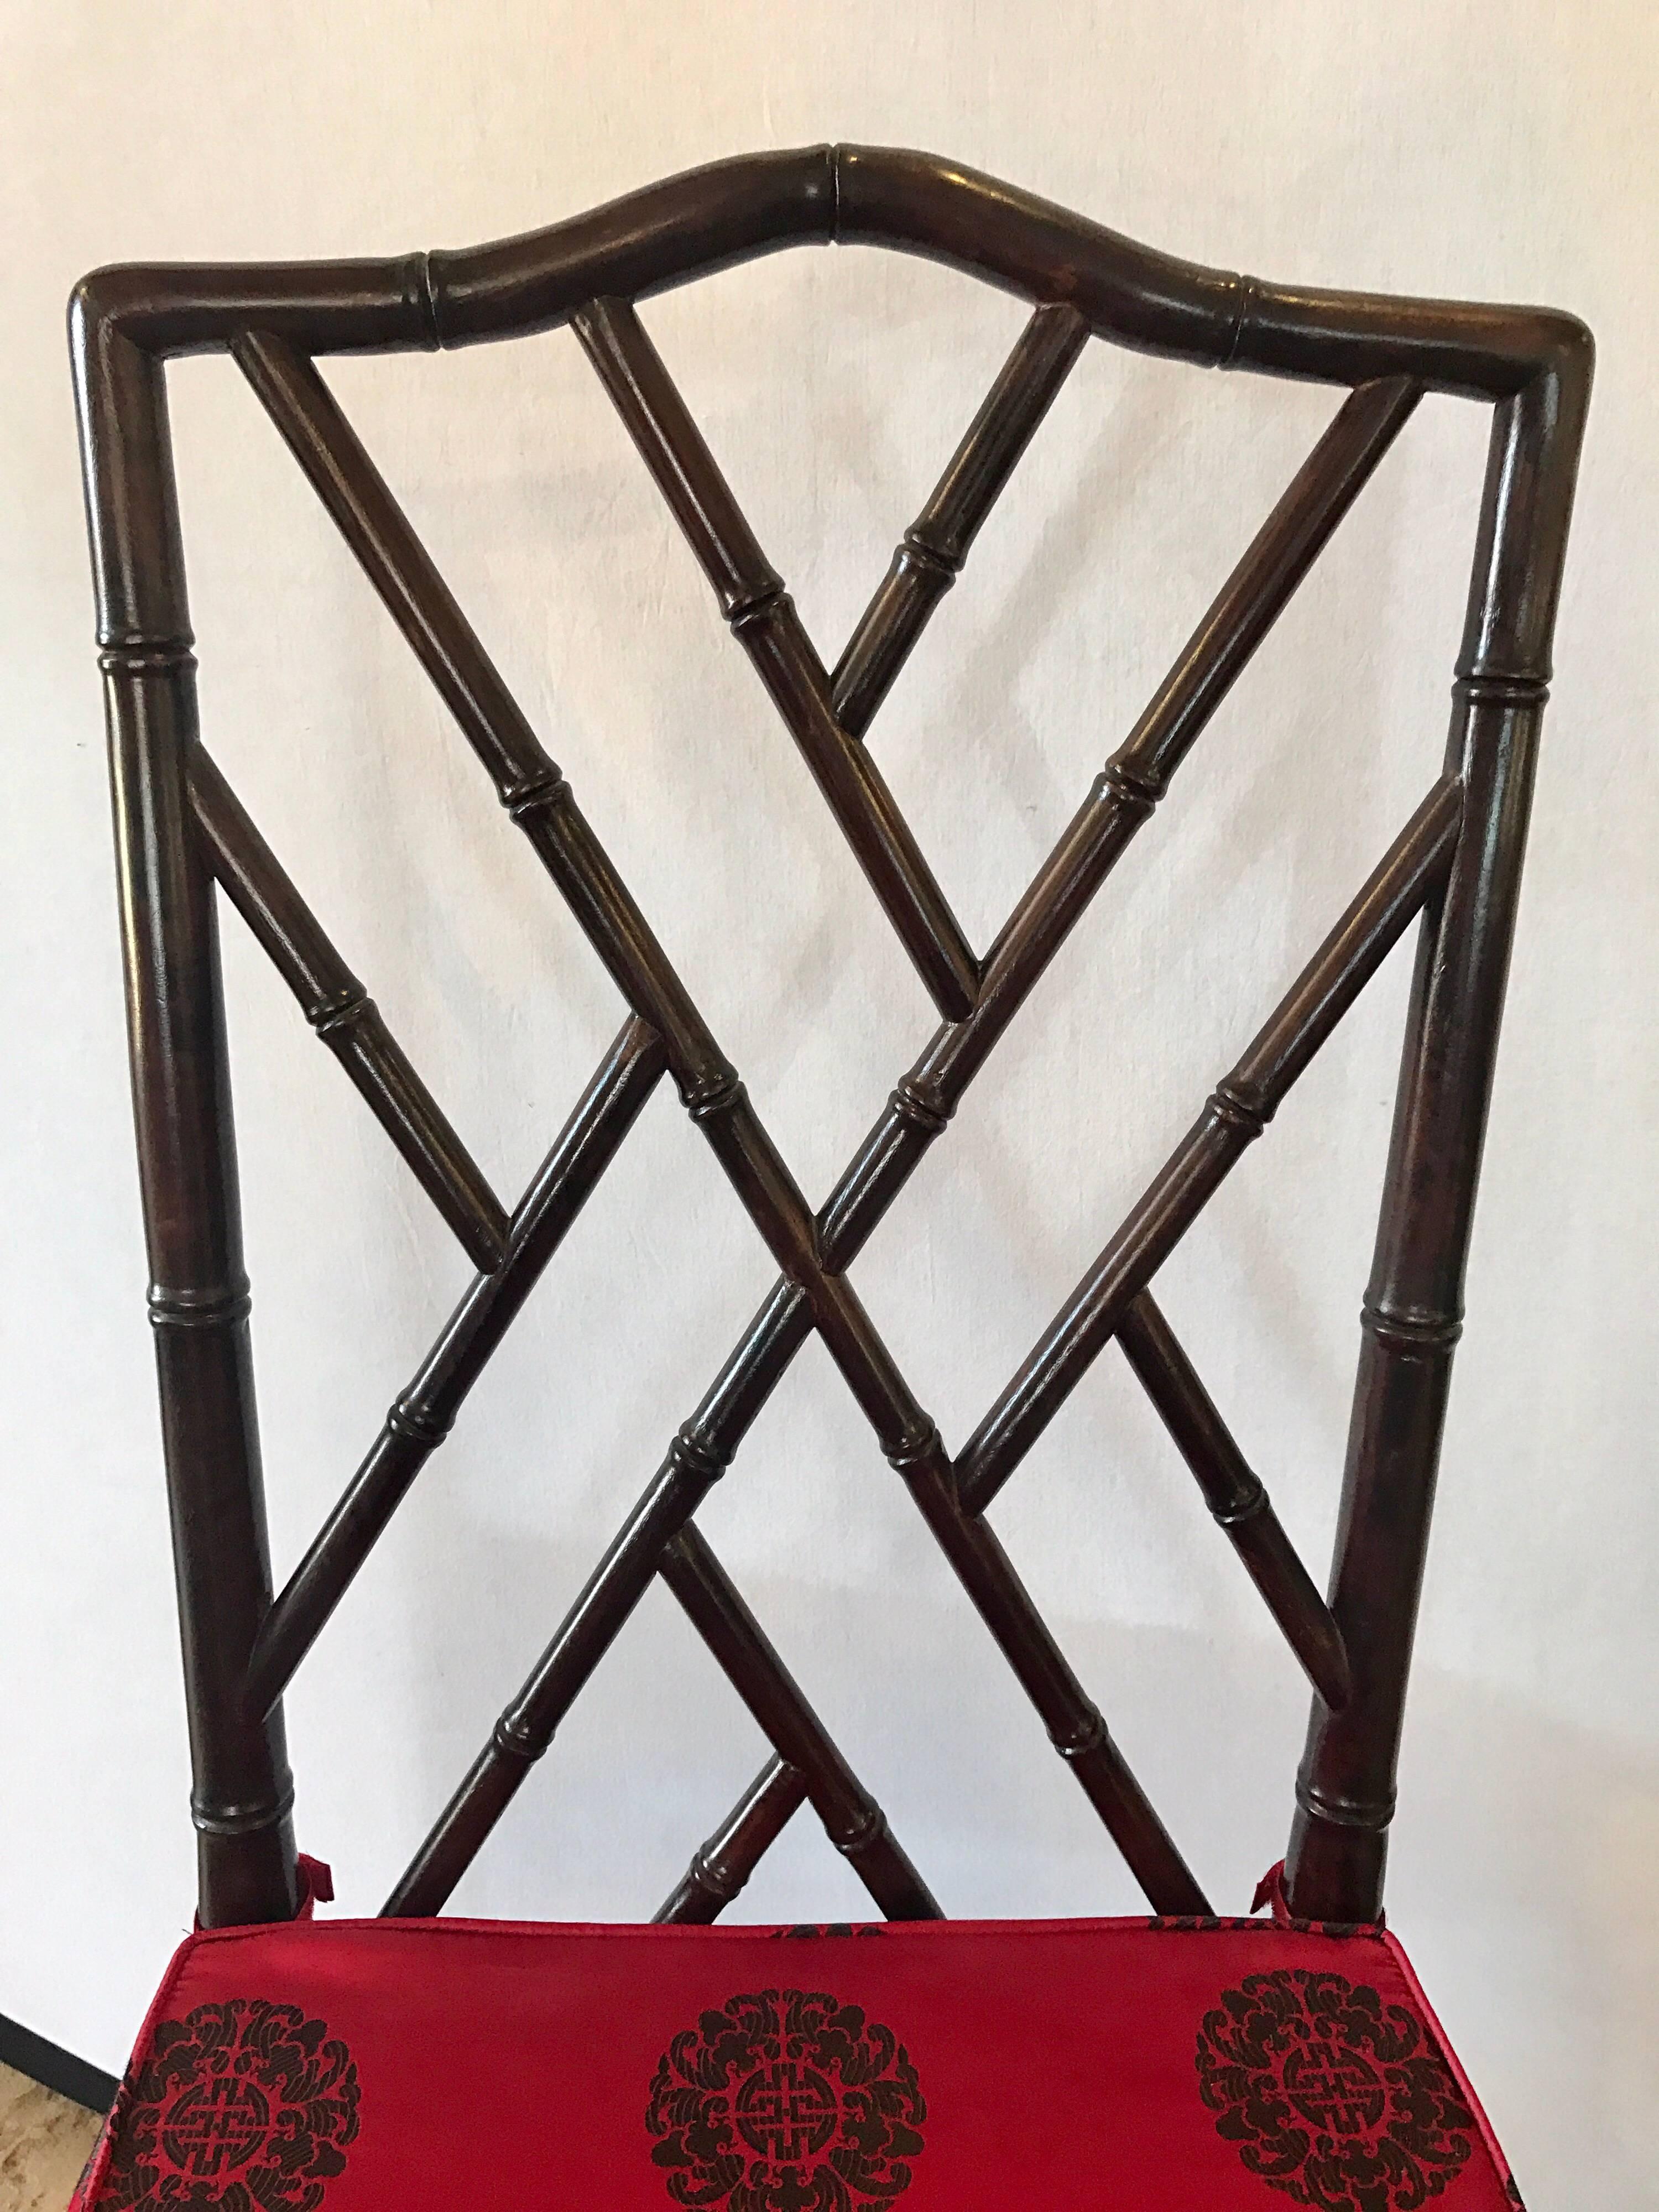 Midcentury all rosewood, faux bamboo Chinese Chippendale chairs. Your search is over. Seat height is 18 inches, all other dimensions are below.